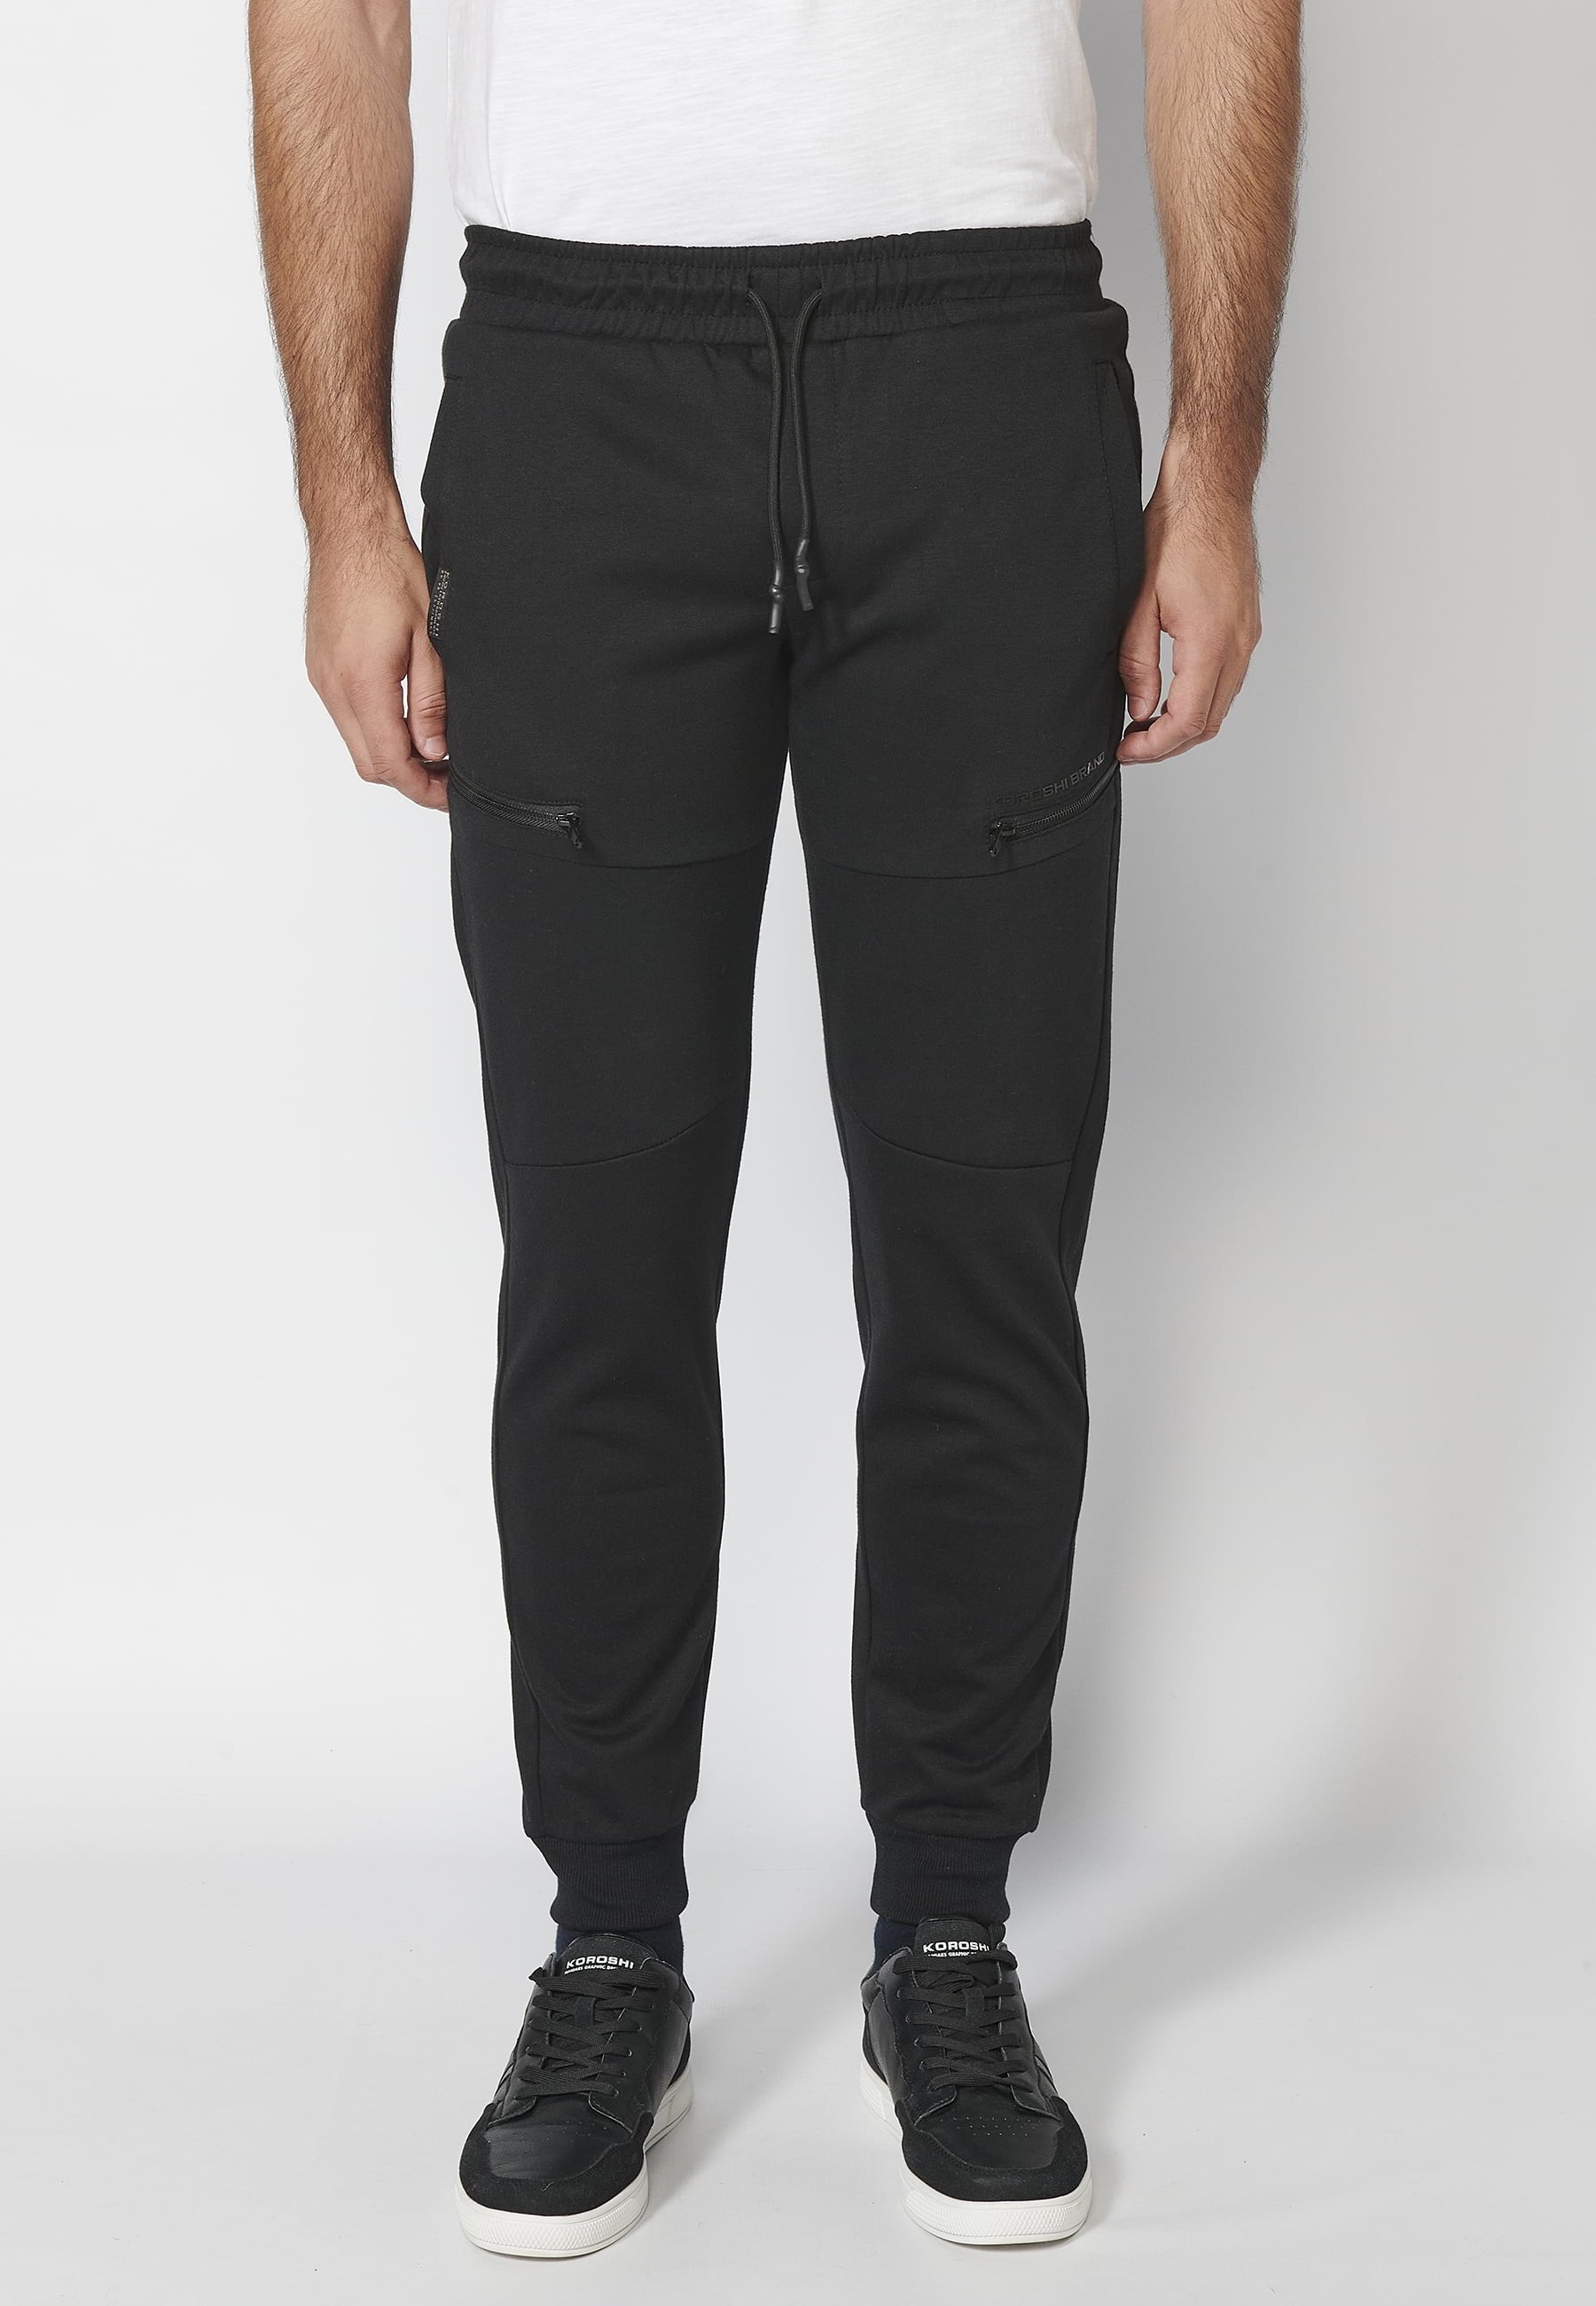 Long jogger pants with elasticated waistband and drawstring with cutouts in the knees in Black color for Men